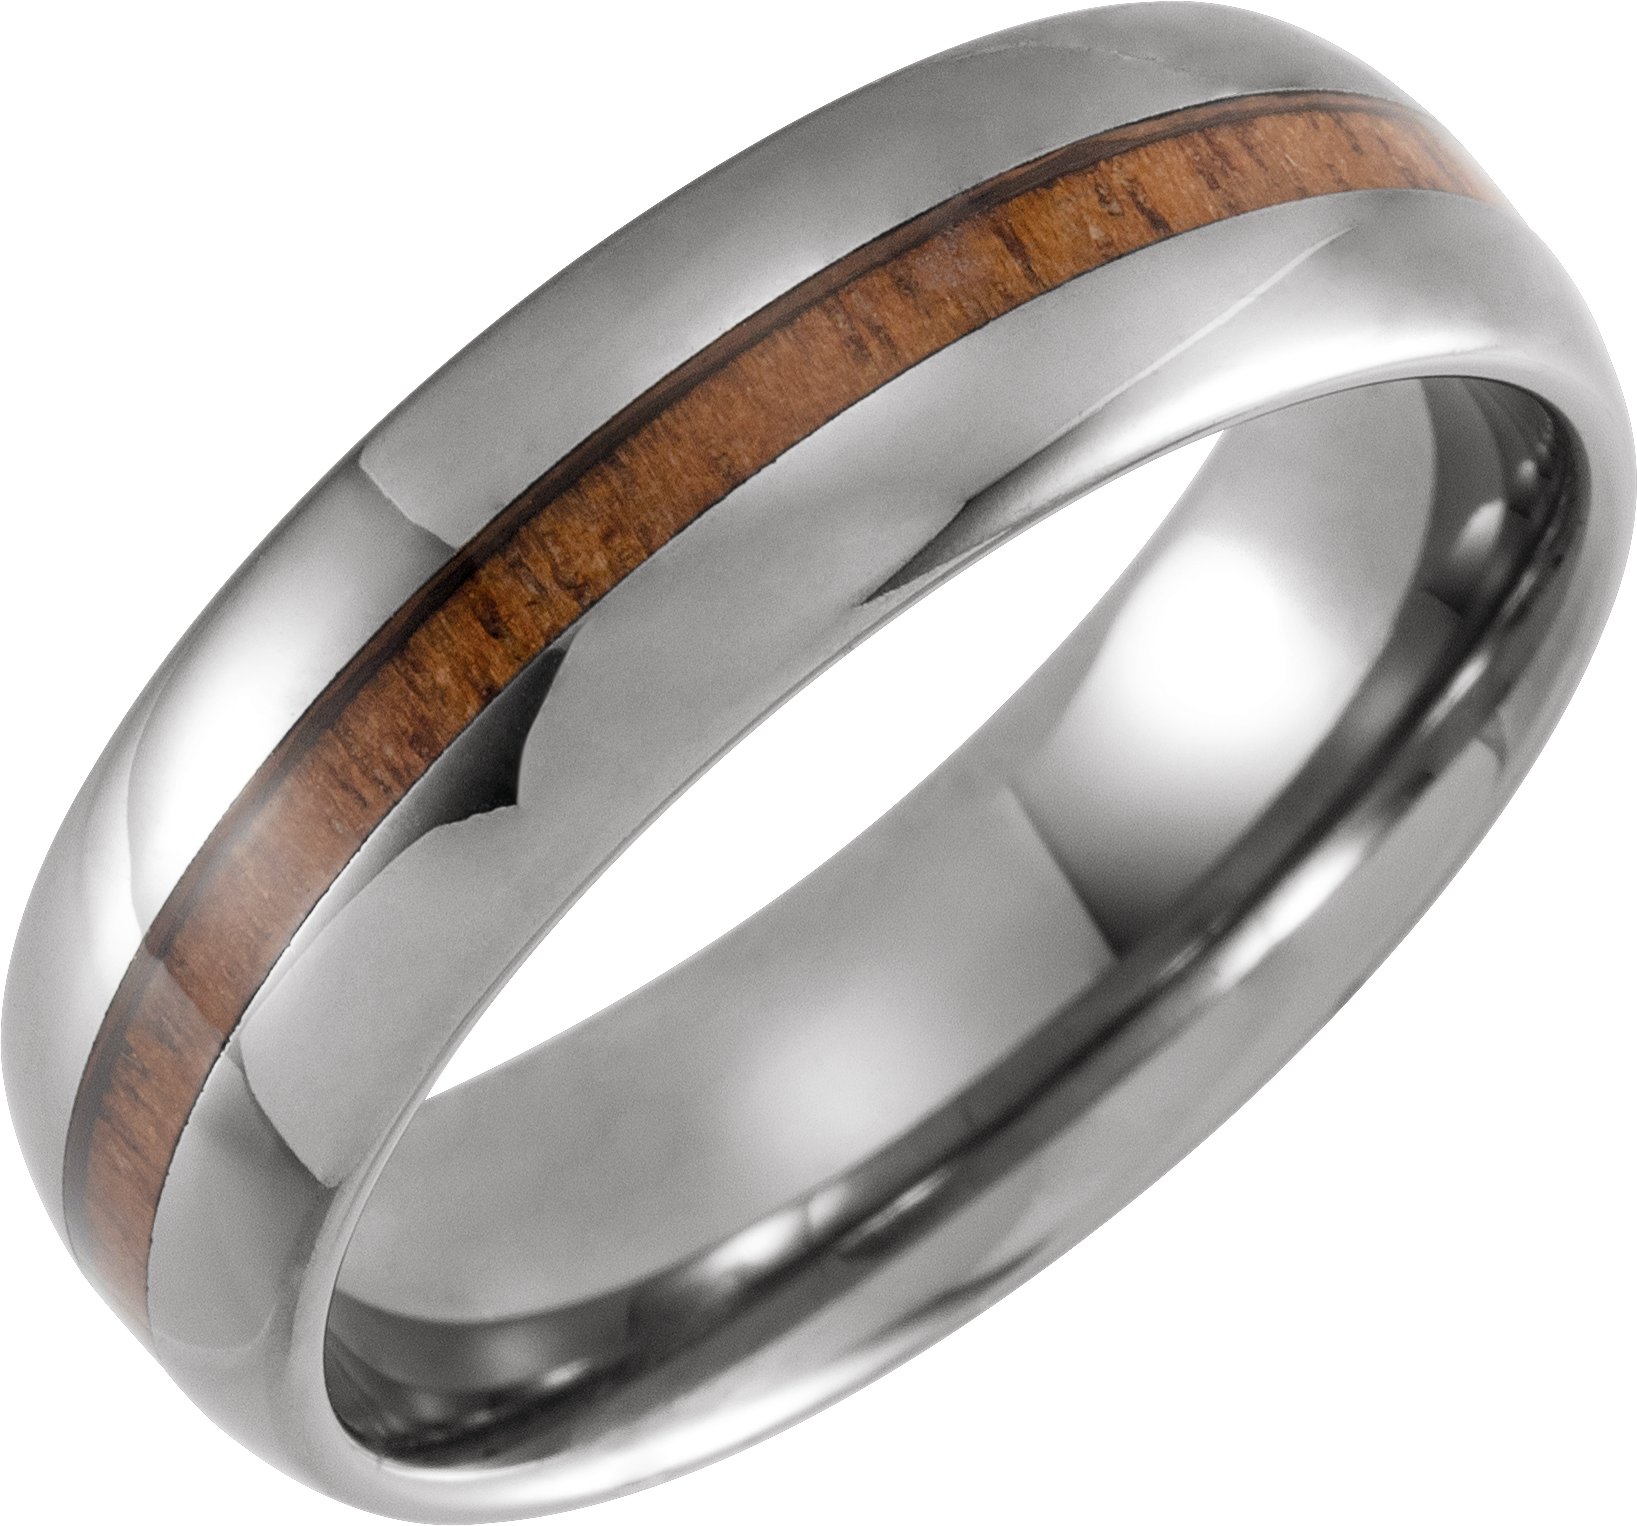 Tungsten 8 mm Half Round Band with Acacia Wood Inlay Size 10.5